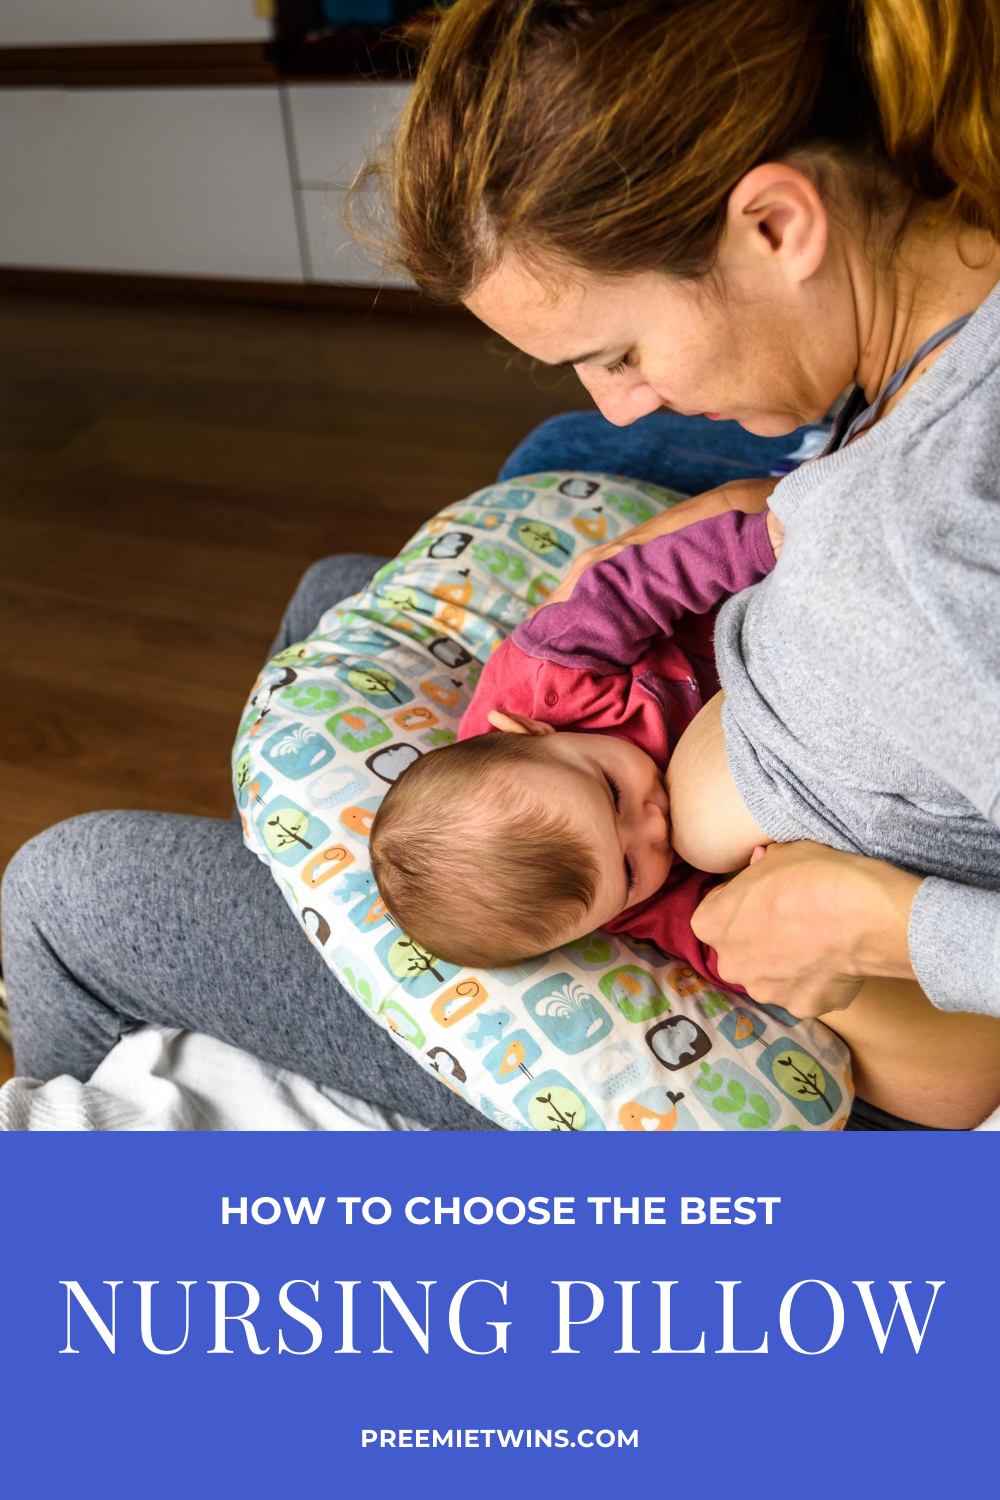 How To Choose The Best Nursing Pillow